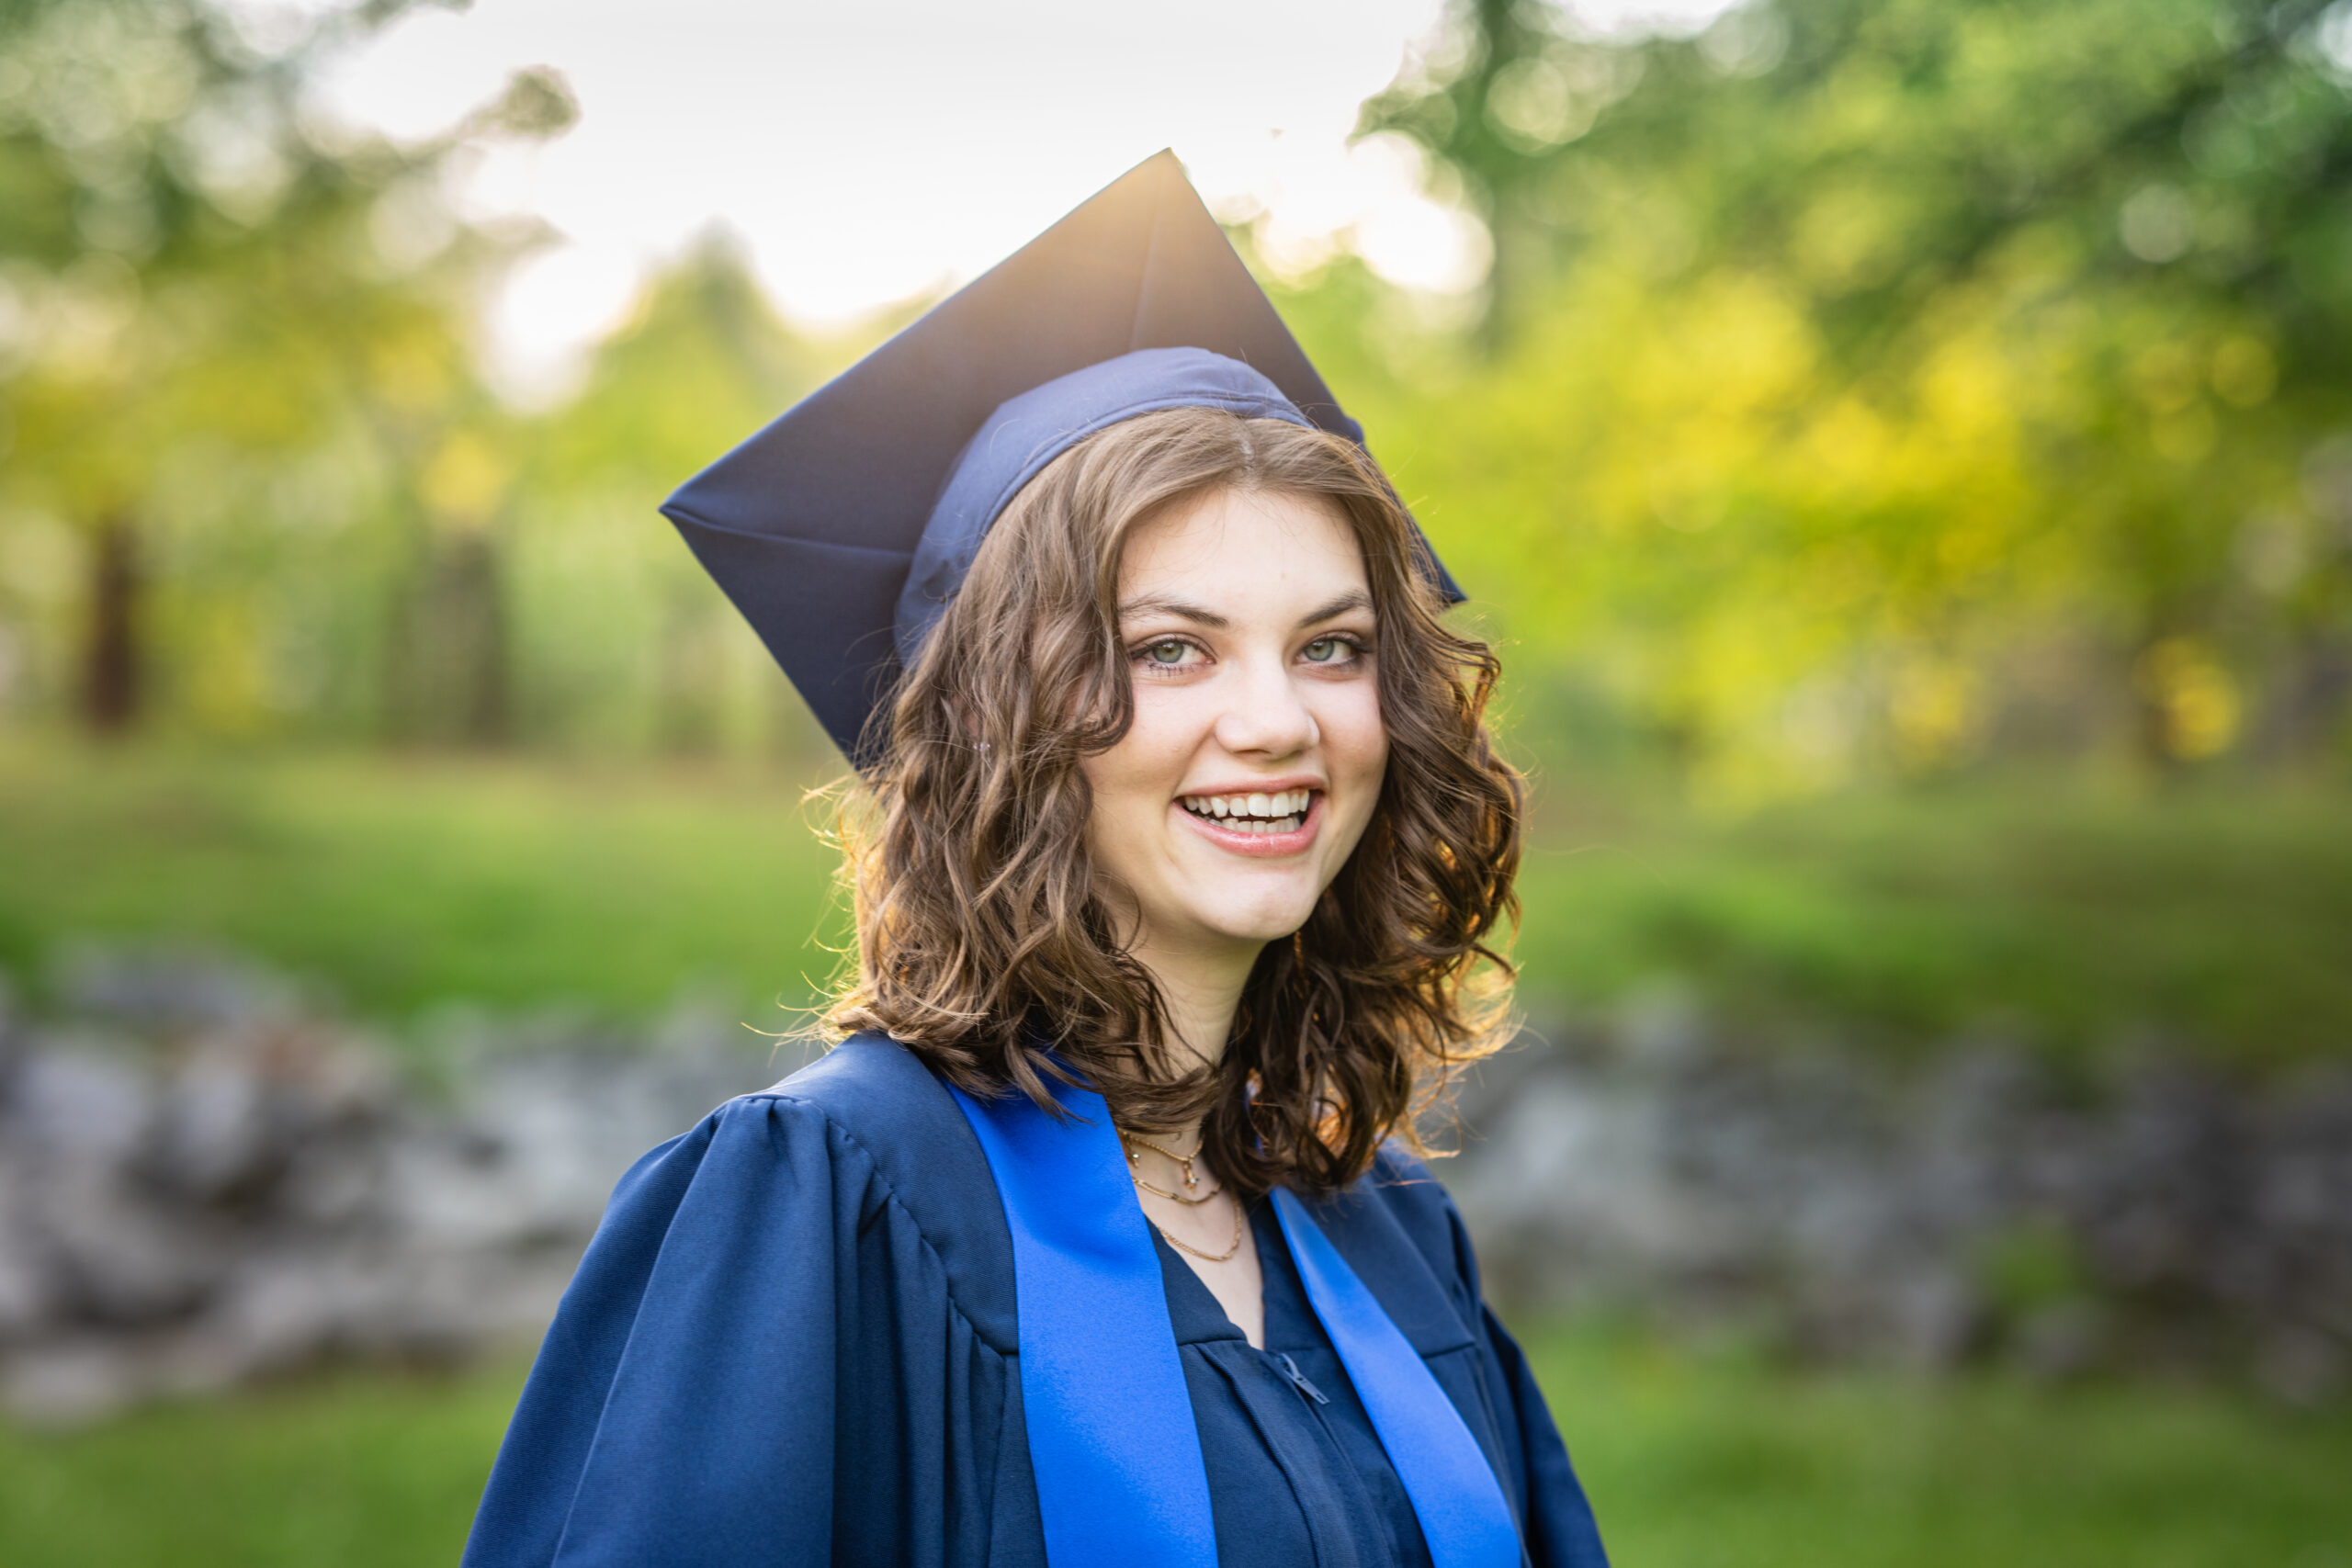 High school senior girl dressed in her cap and gown smiles for the camera with the sun setting behind her